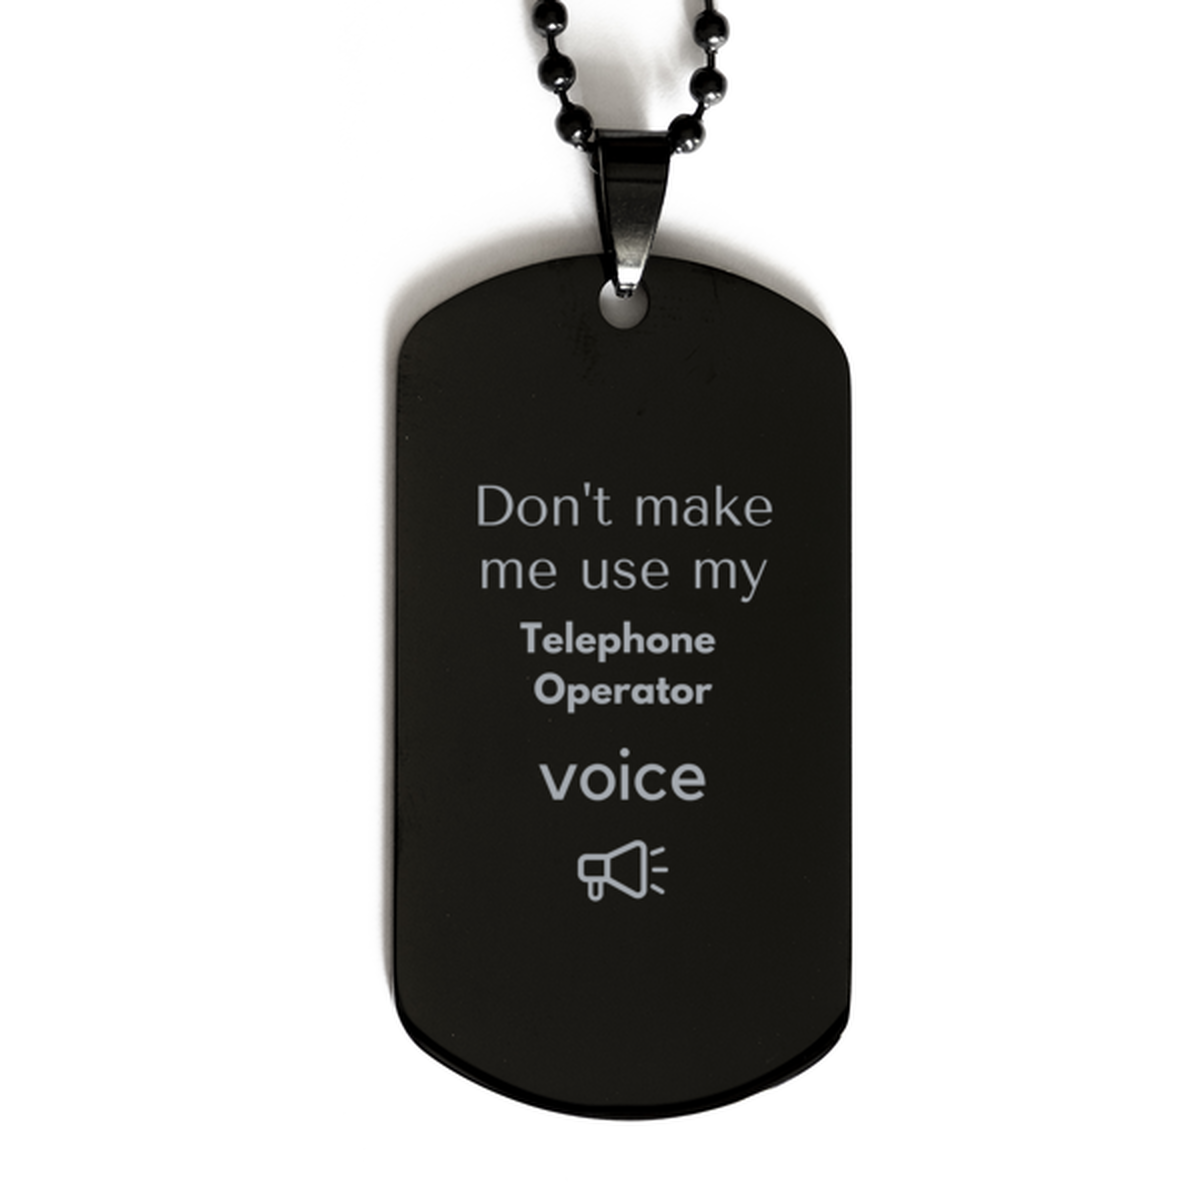 Don't make me use my Telephone Operator voice, Sarcasm Telephone Operator Gifts, Christmas Telephone Operator Black Dog Tag Birthday Unique Gifts For Telephone Operator Coworkers, Men, Women, Colleague, Friends